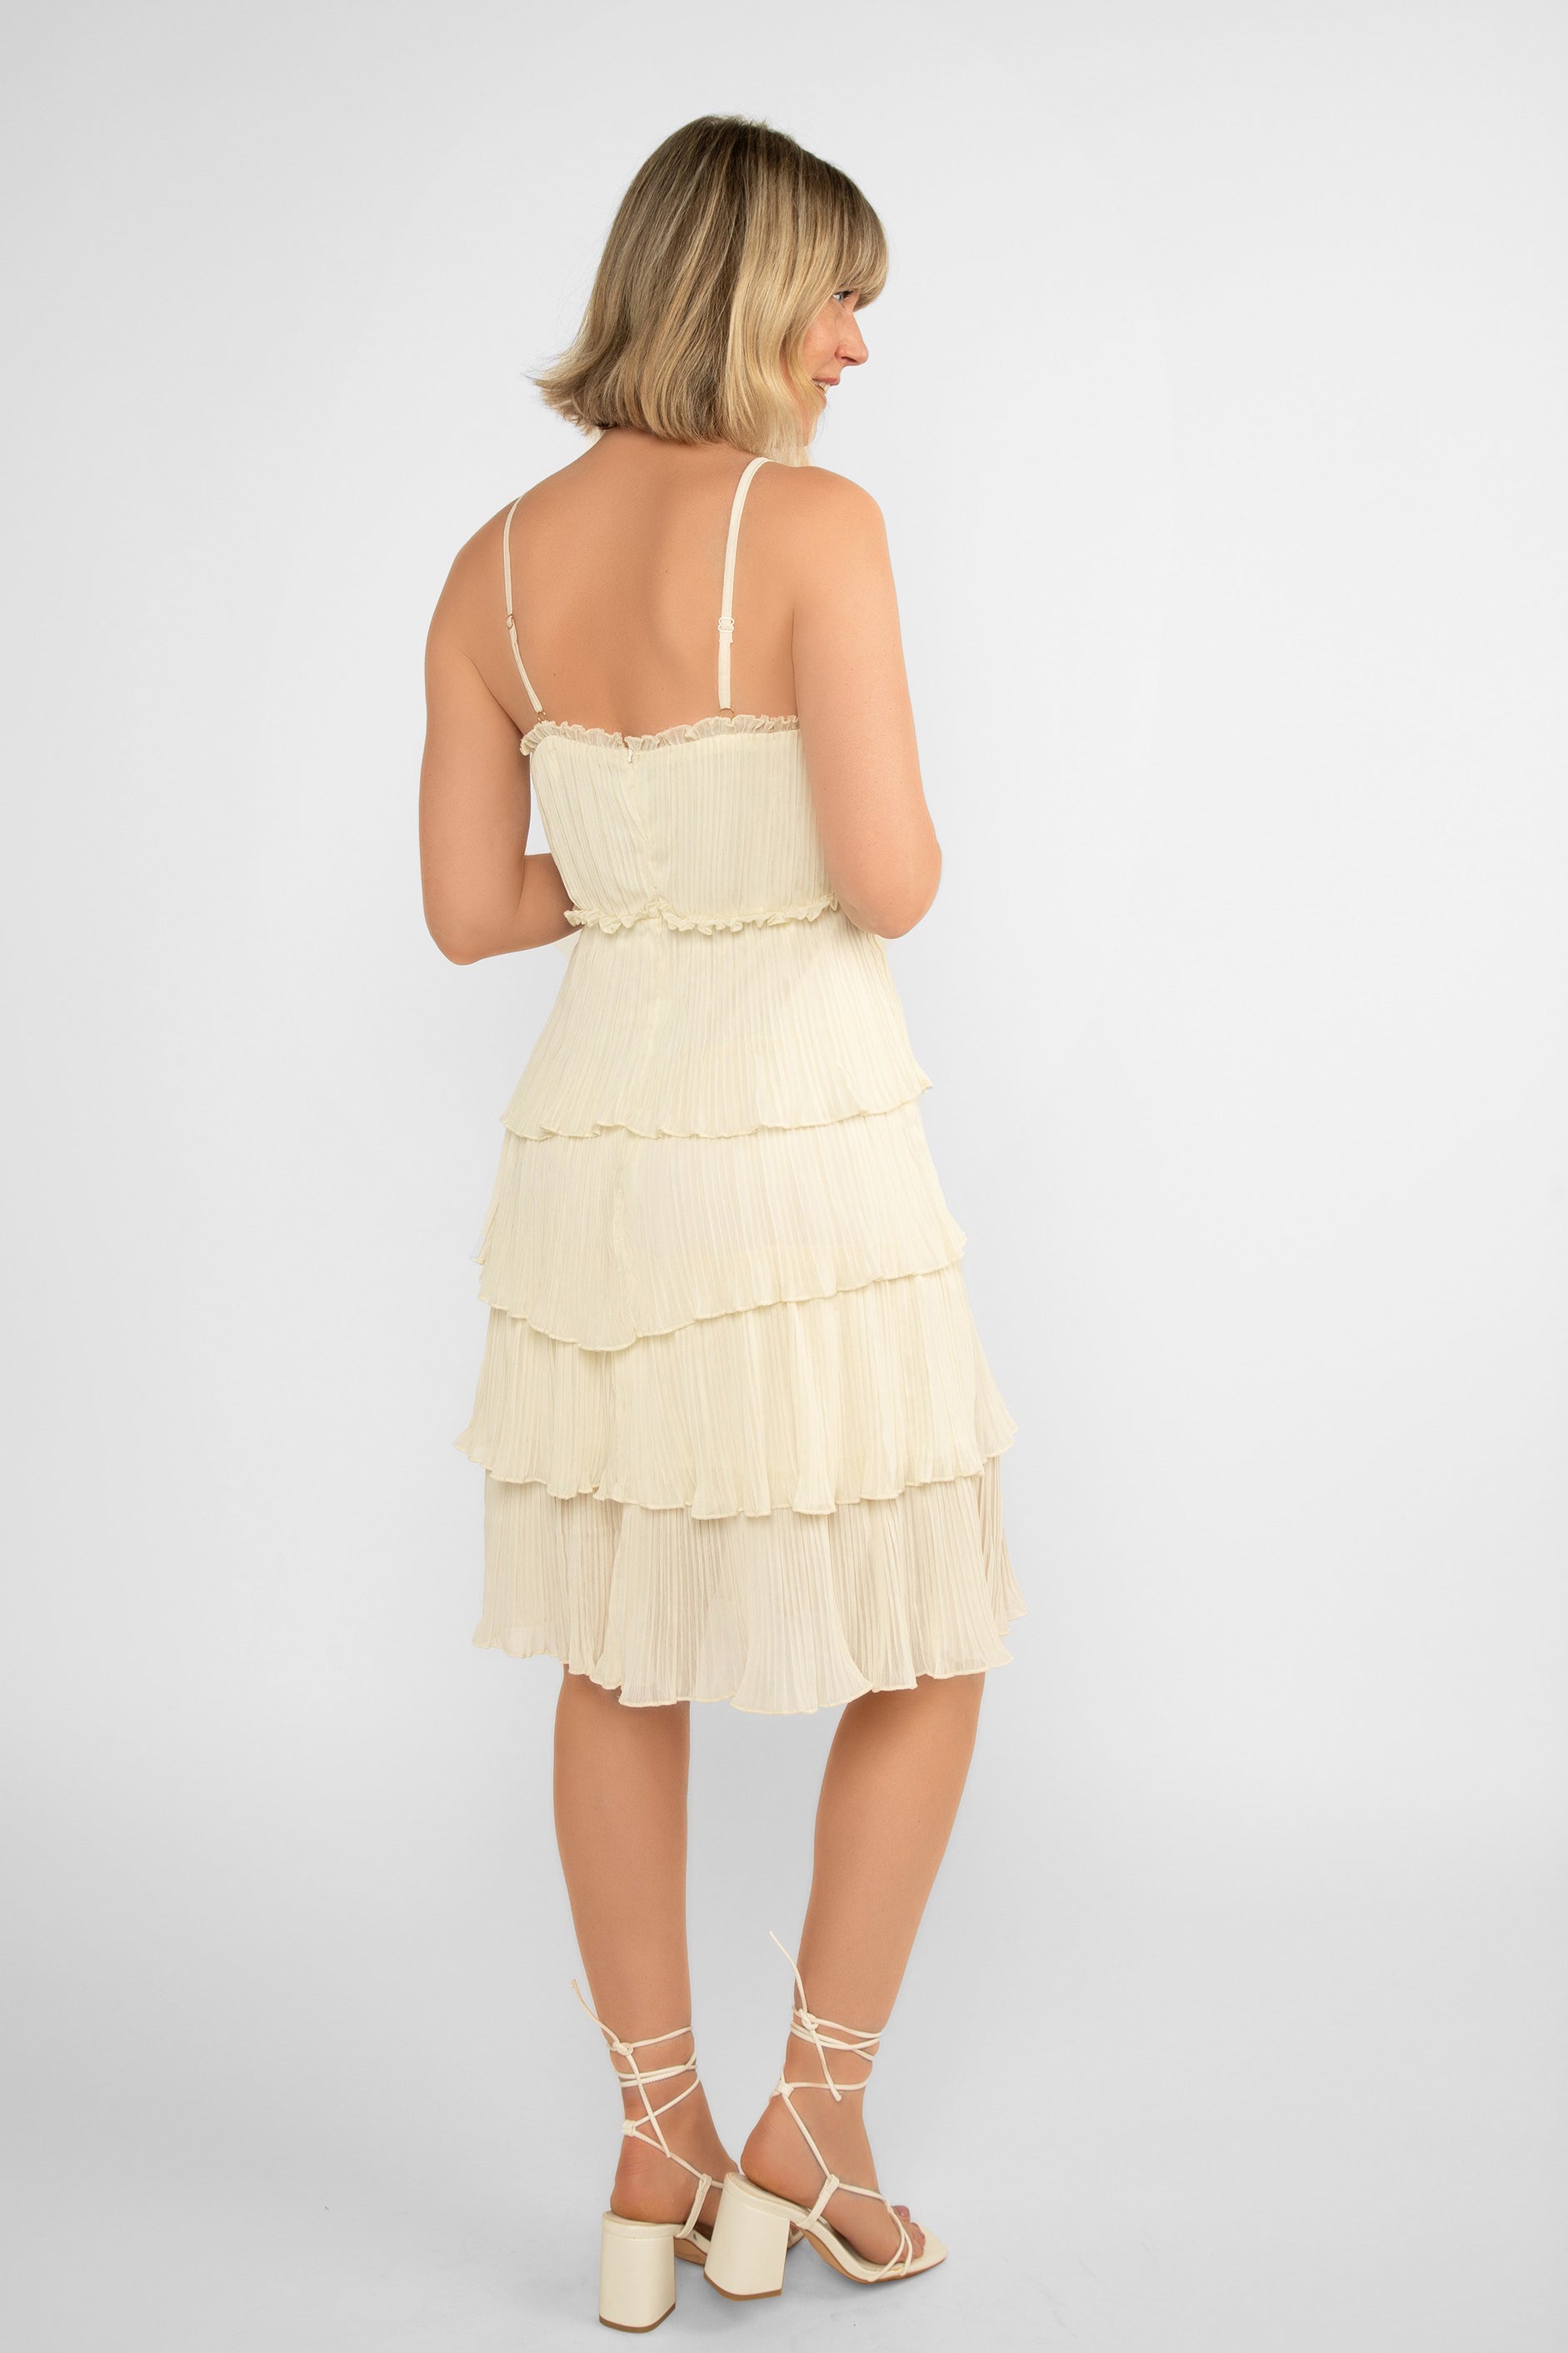 Back view of LATE (DR-6918391) Nikita Dress - Women's Sleeveless with Spaghetti Strap Knee Length Dress - lined pleated chiffon, layered knee length skirt in Off White